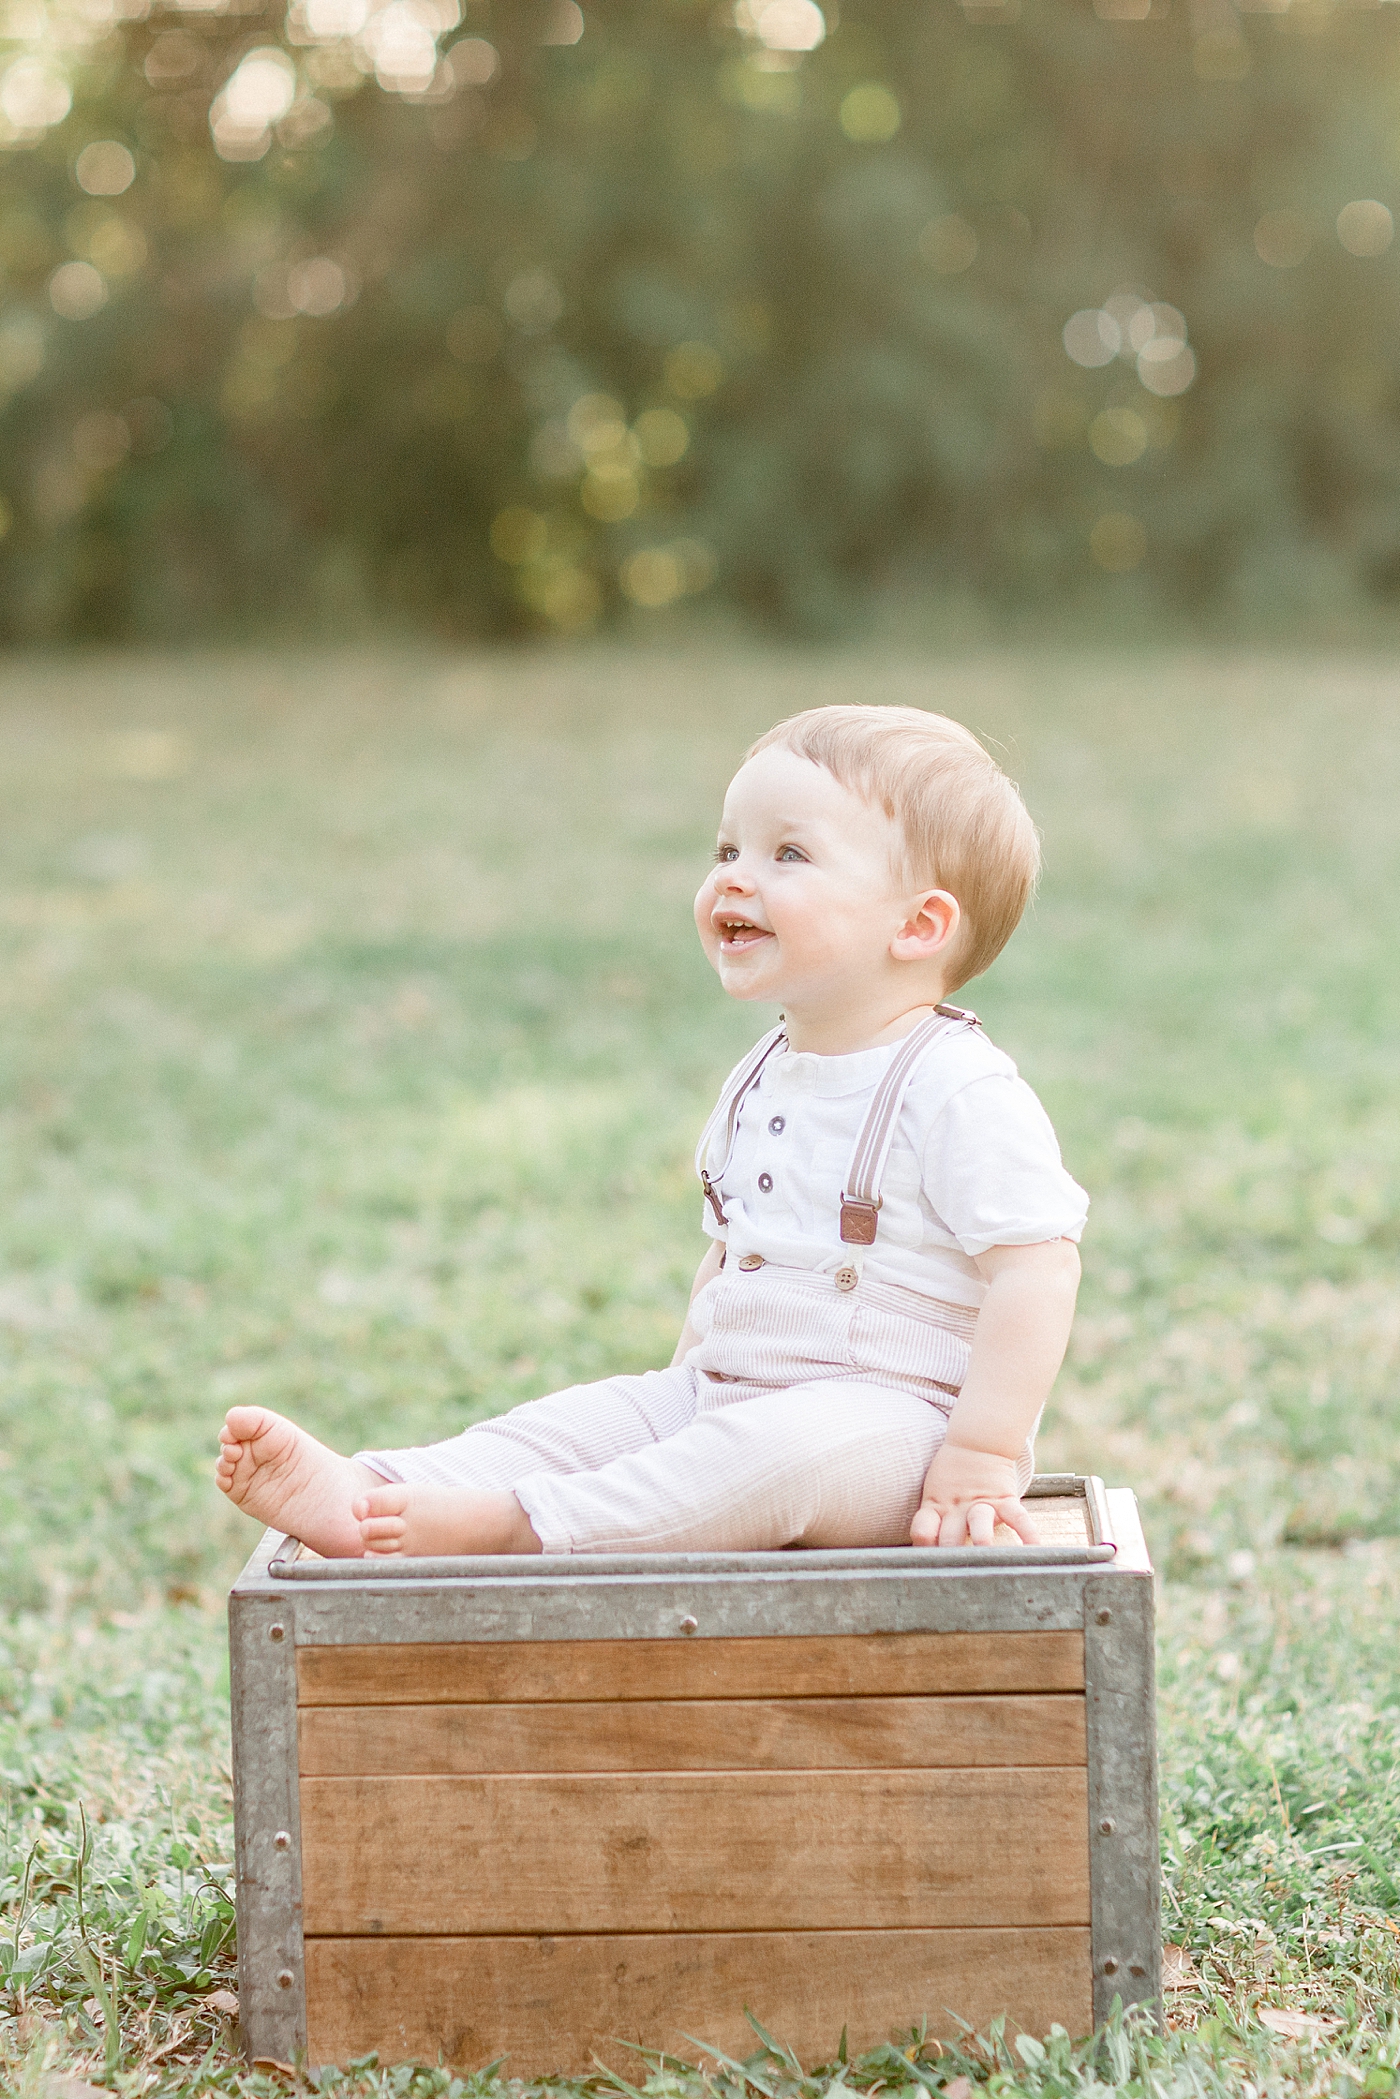 One year old sitting on wood create for first birthday photoshoot Brittany Elise Photography.